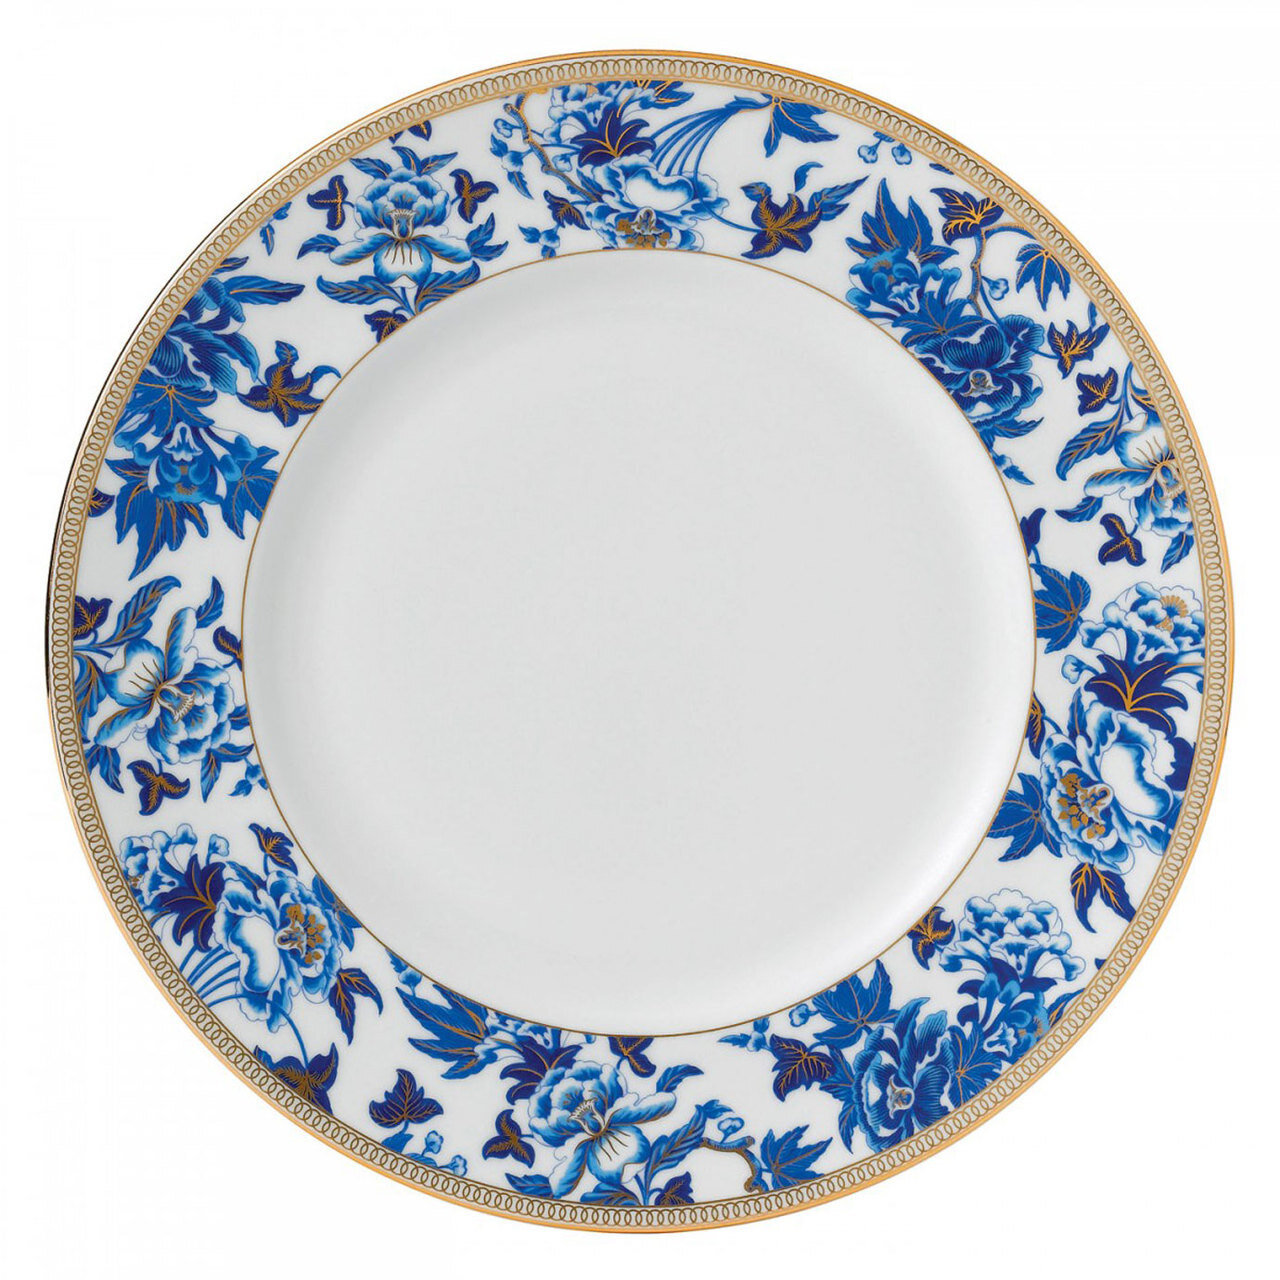 Wedgwood Hibiscus Accent Salad Plate 9 Inch